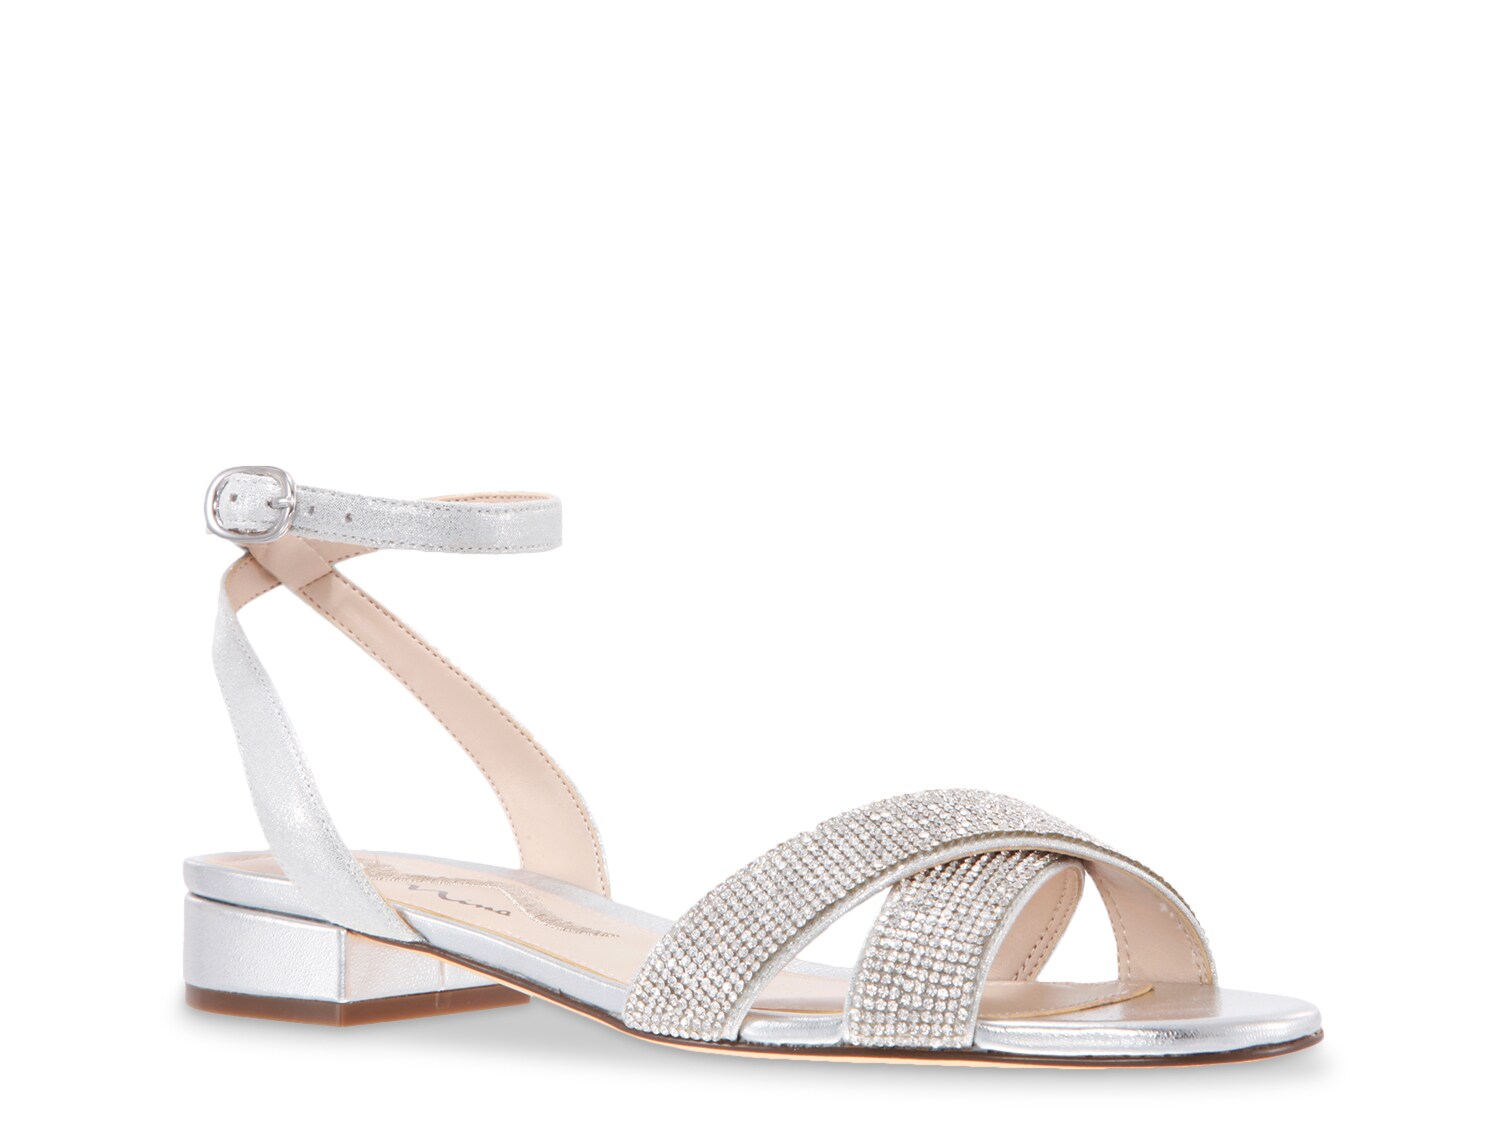 dsw silver evening shoes